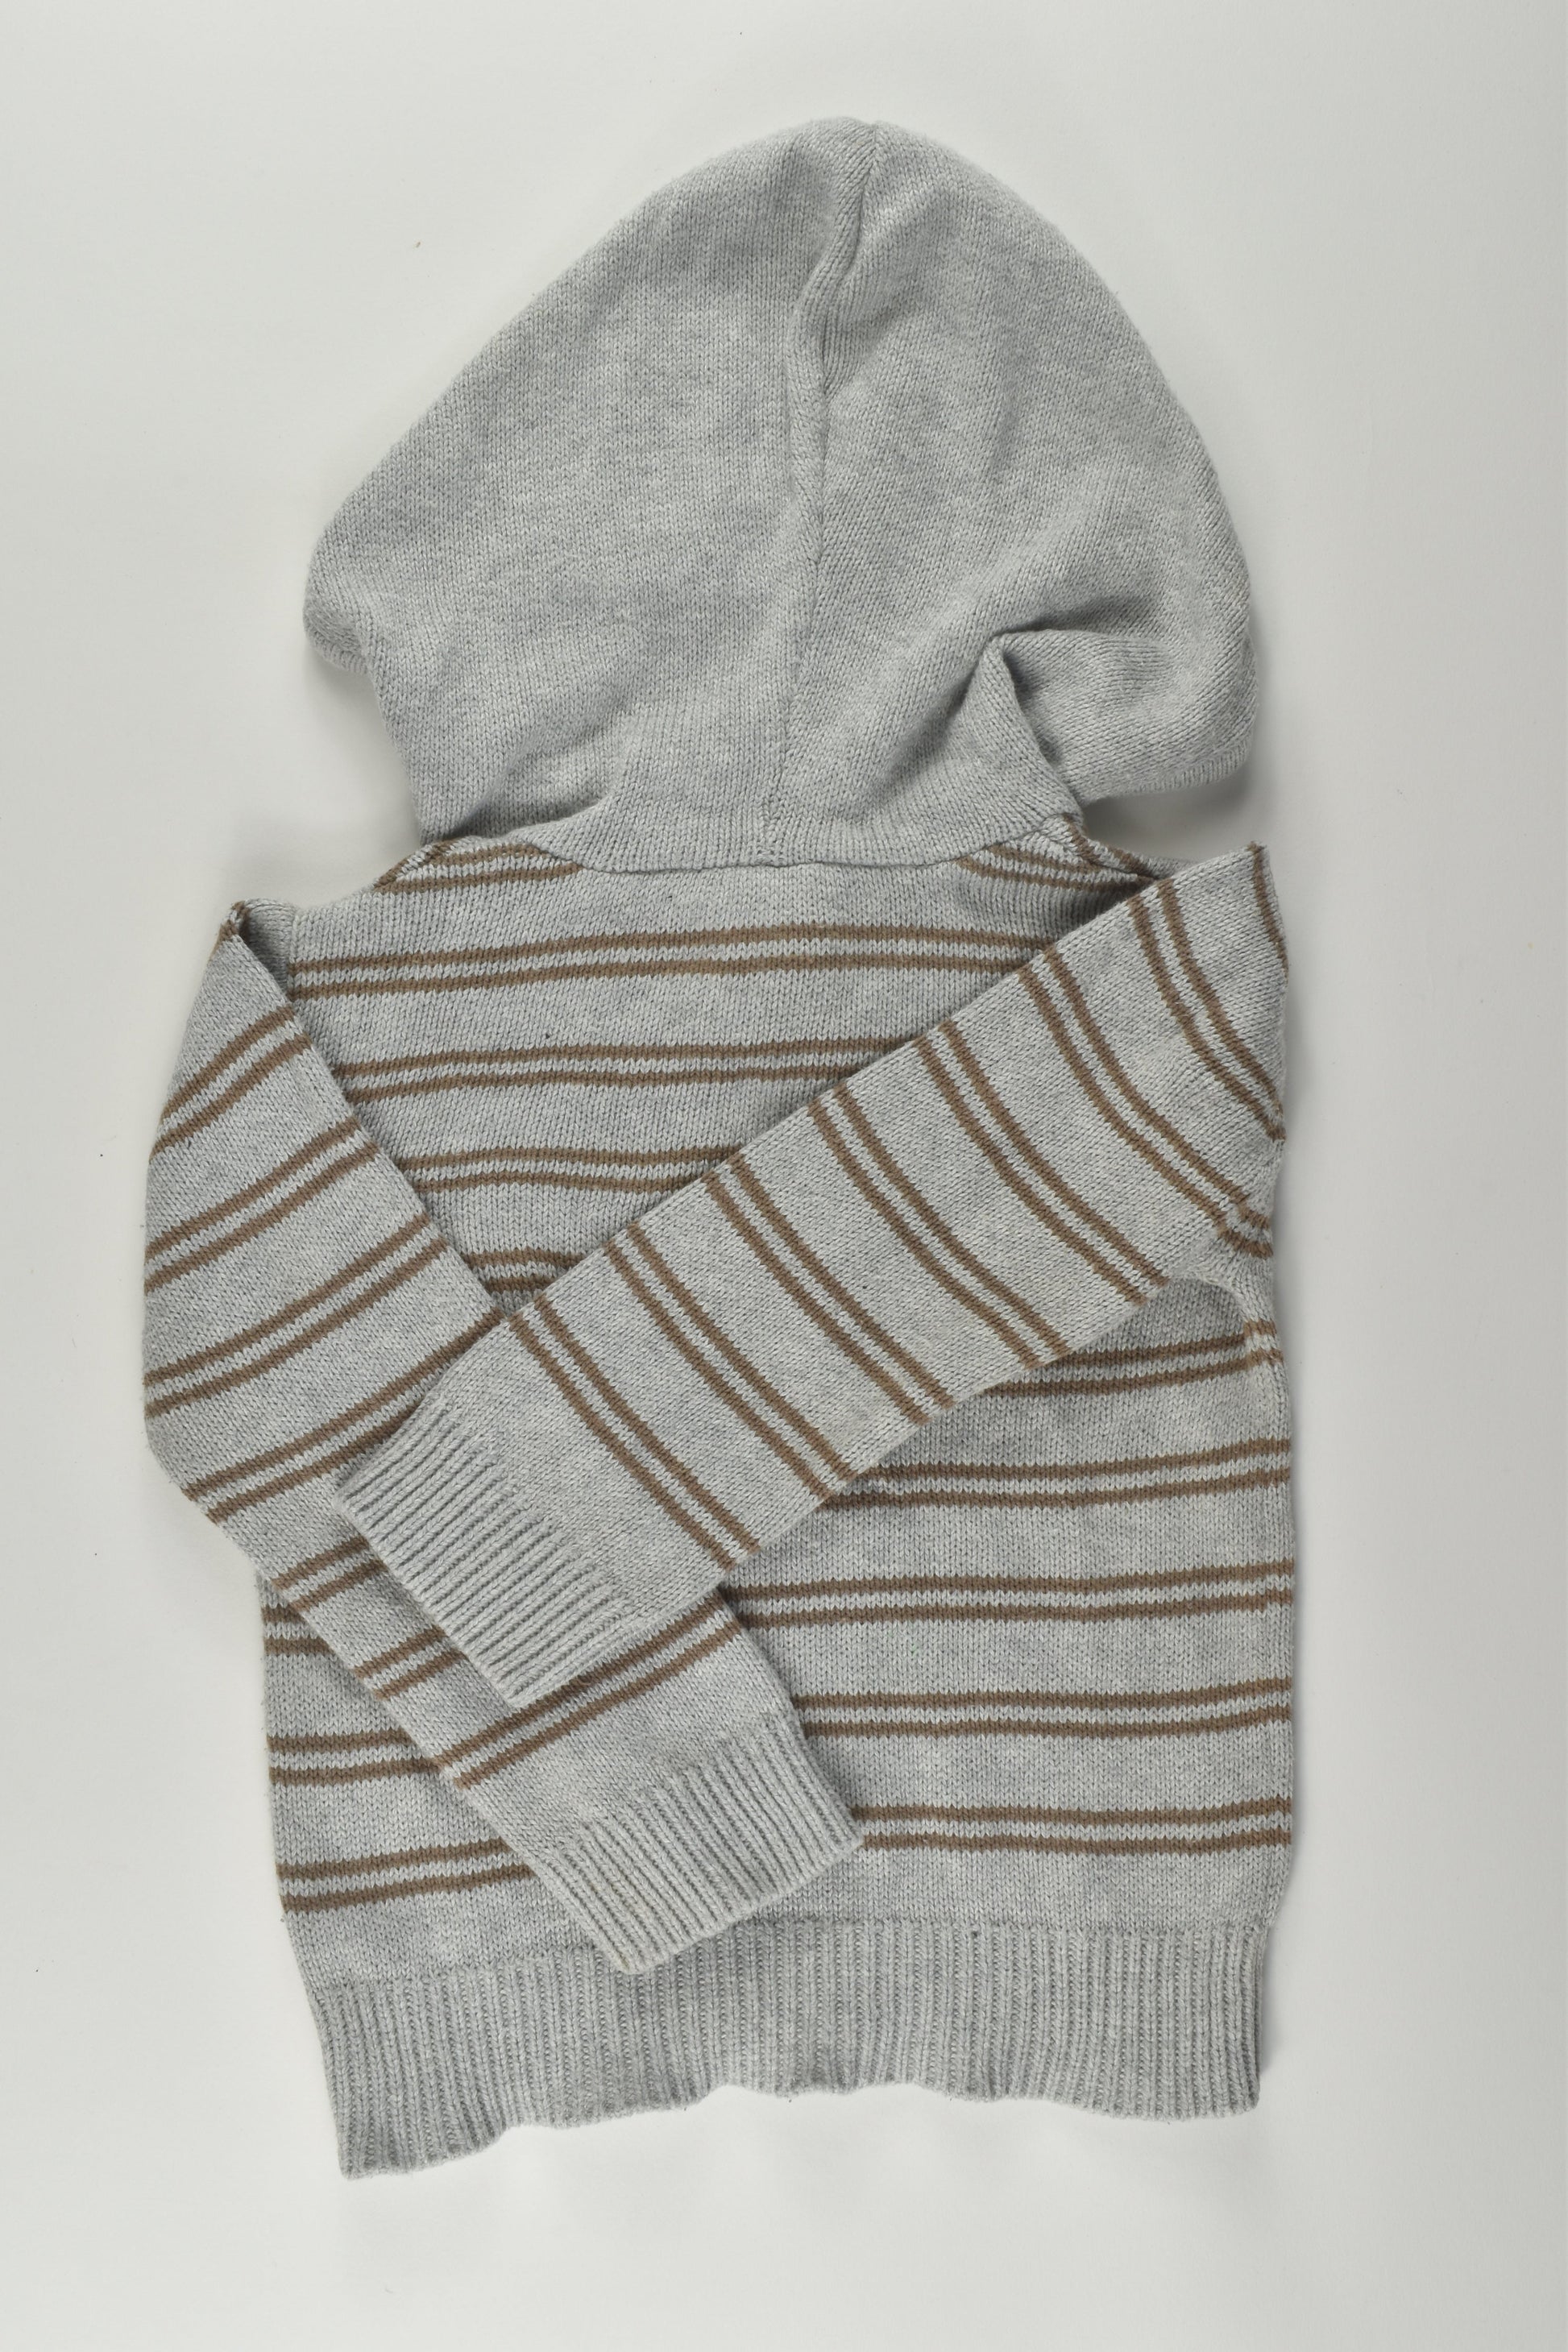 Target Size 1 Knit Jumper with Hood